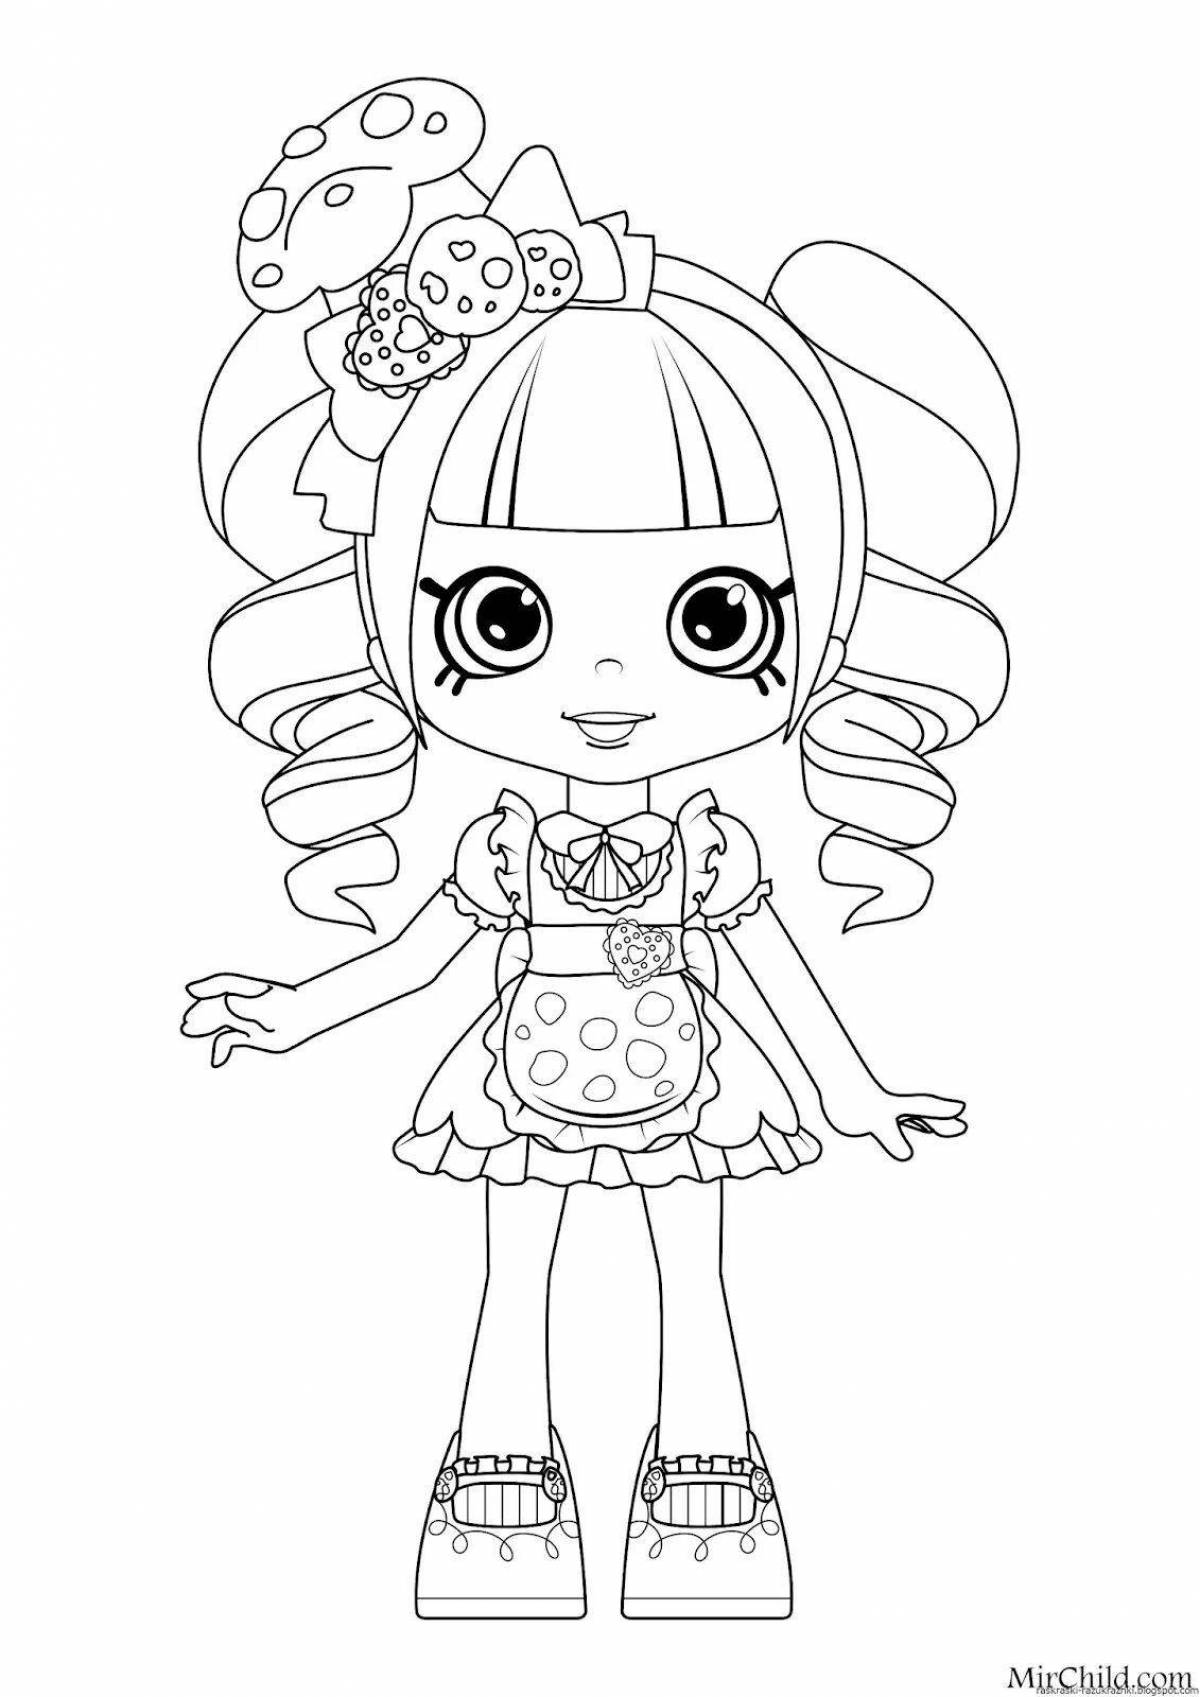 Cute doll coloring